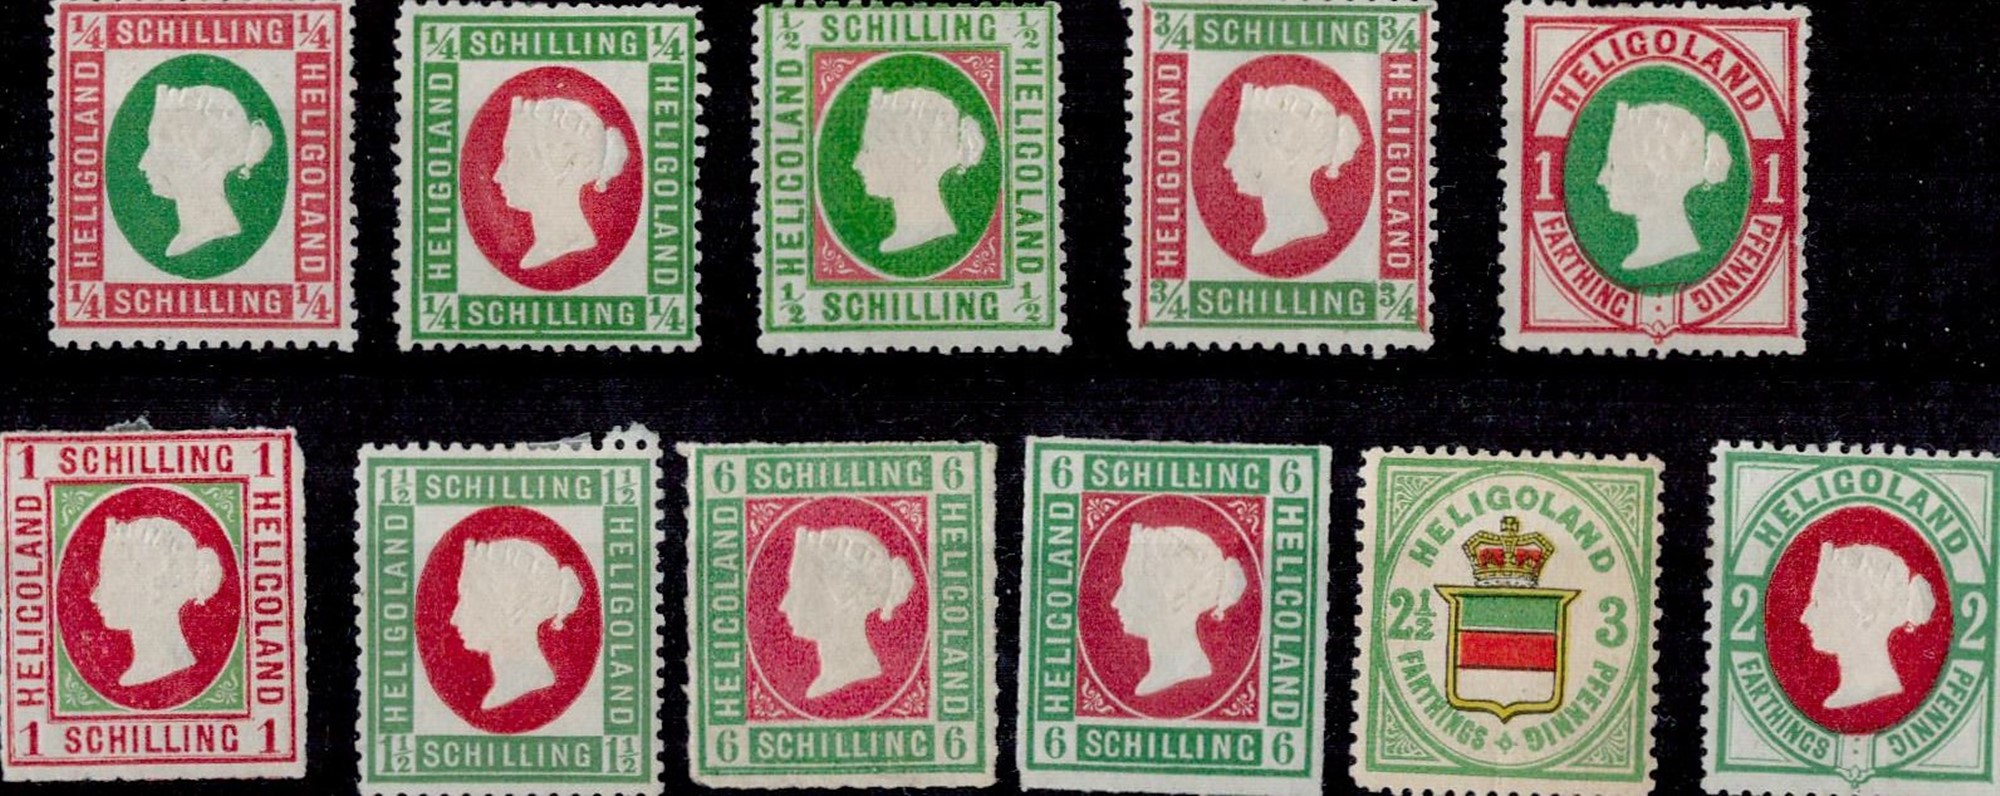 Heligoland 11 Stamps Mint, high catalogue value may include reprints, nice selection. Good - Image 2 of 2